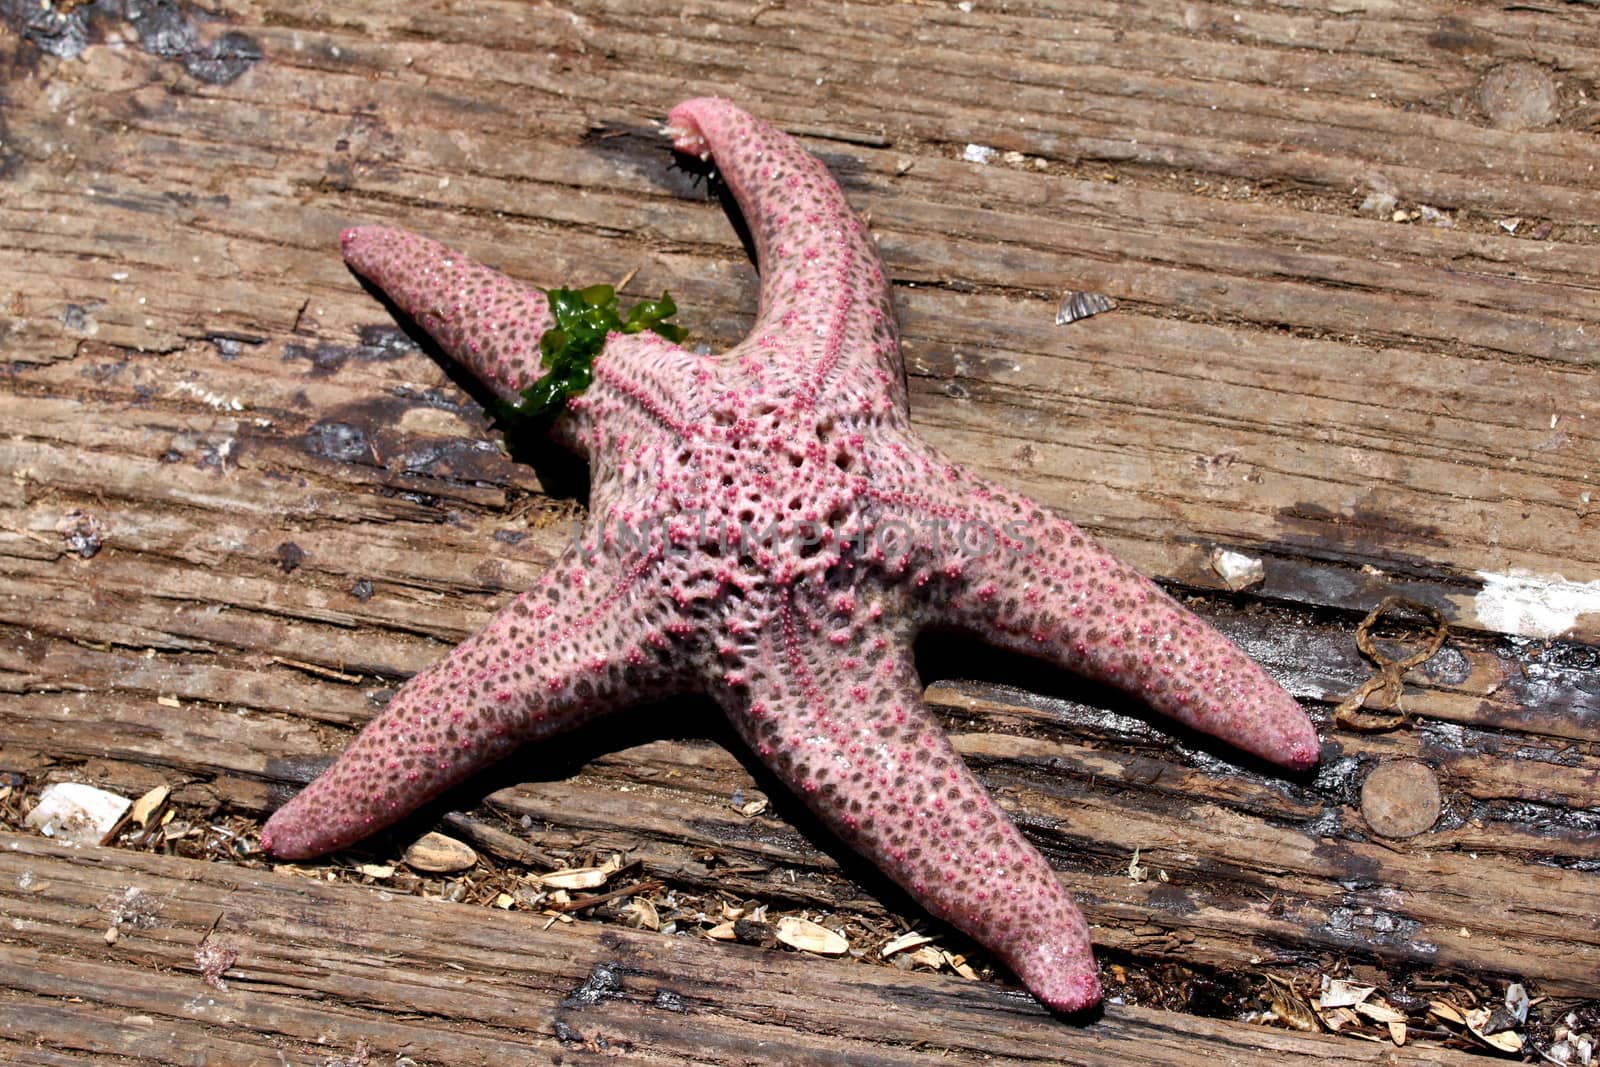 Closeup few of a seastar on wooden planks from a pier.